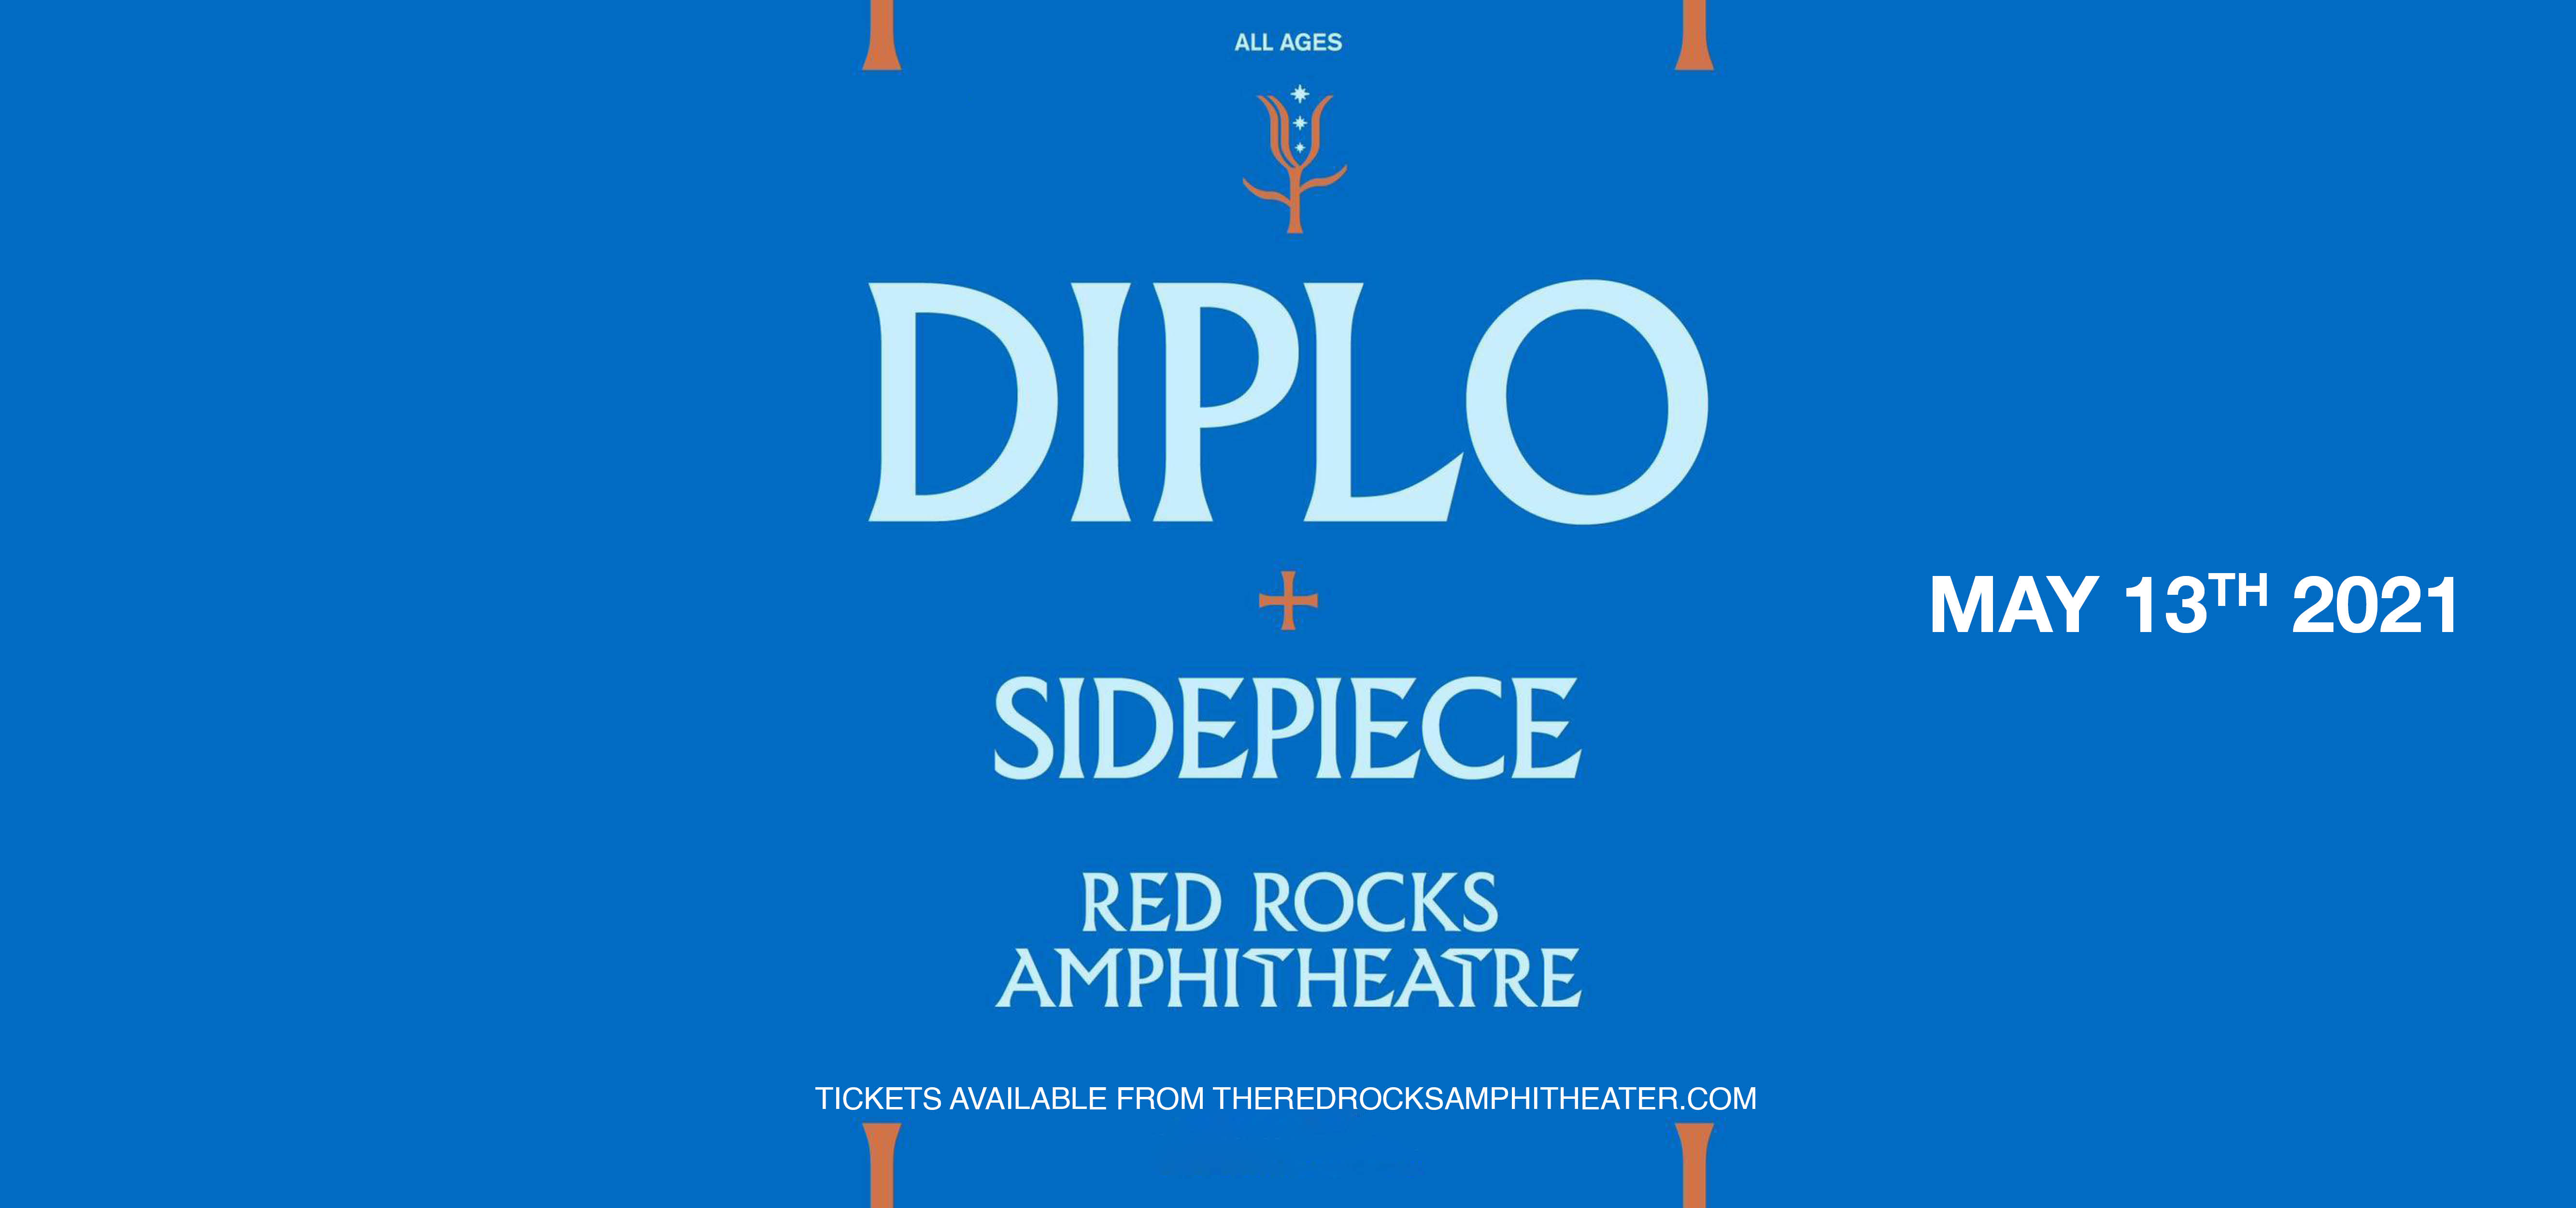 Diplo with Sidepiece at Red Rocks Amphitheater